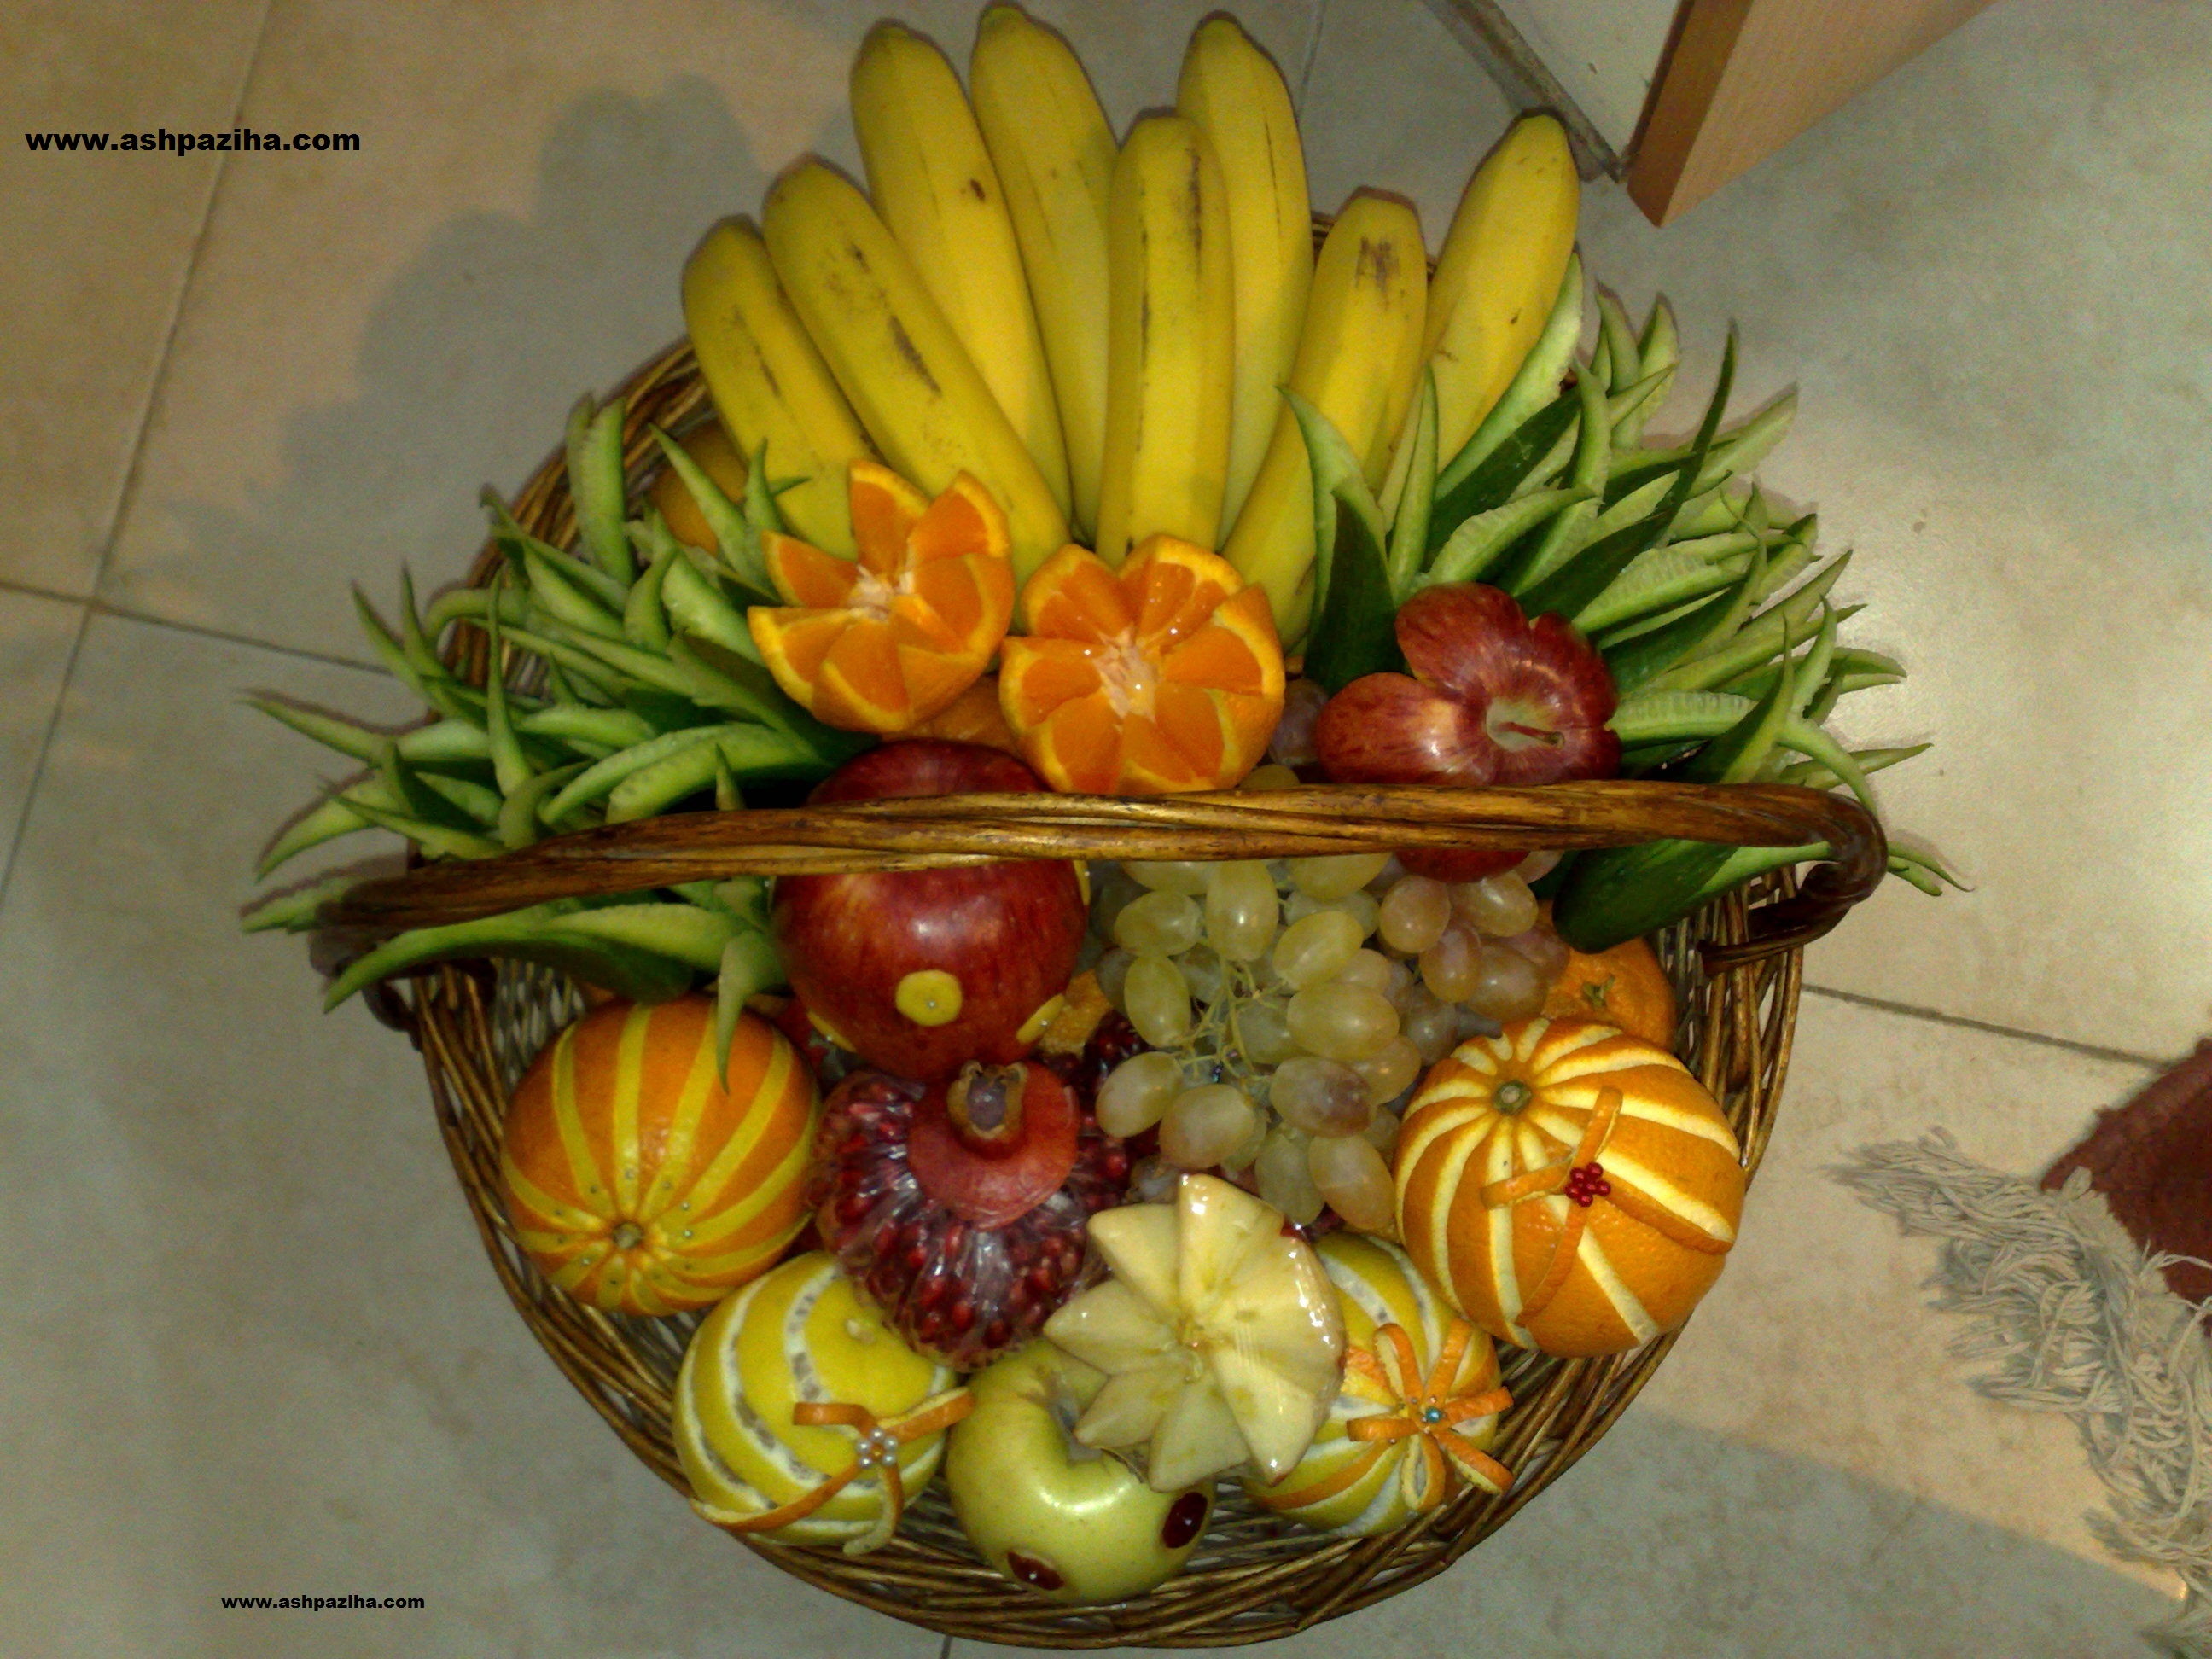 Types - decoration - Fruits - Nuts - night - Vancouver - Special - brides (39)